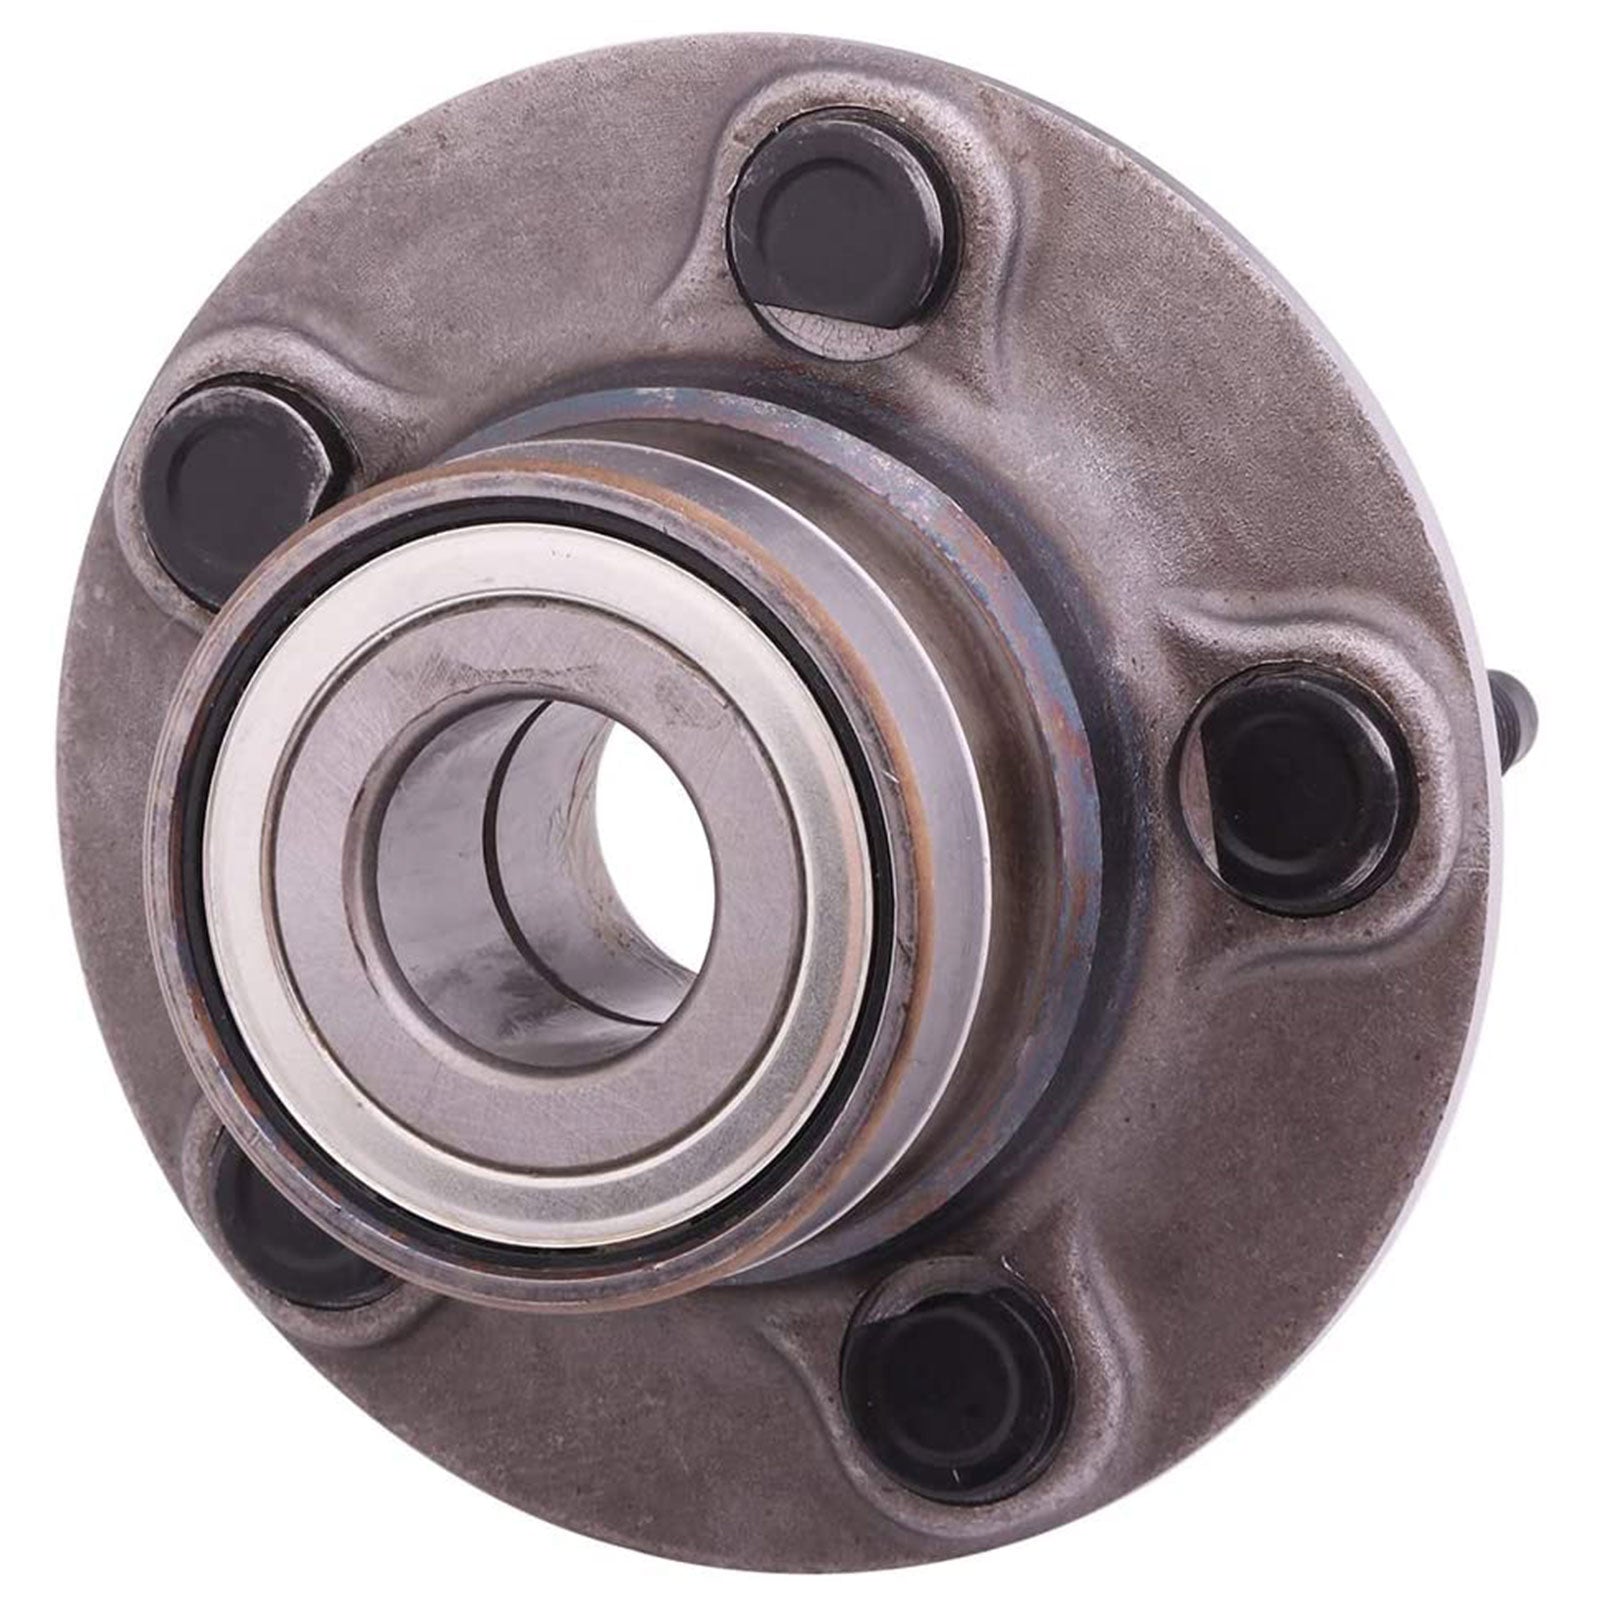 MotorbyMotor (2WD Rear Wheel Bearing and Hub Assembly Fits for 1990-2007 Ford Taurus, 1990-2004 Mercury Sable Wheel Hub w/5 Lugs [FWD, Non-ABS]-512164 MotorbyMotor